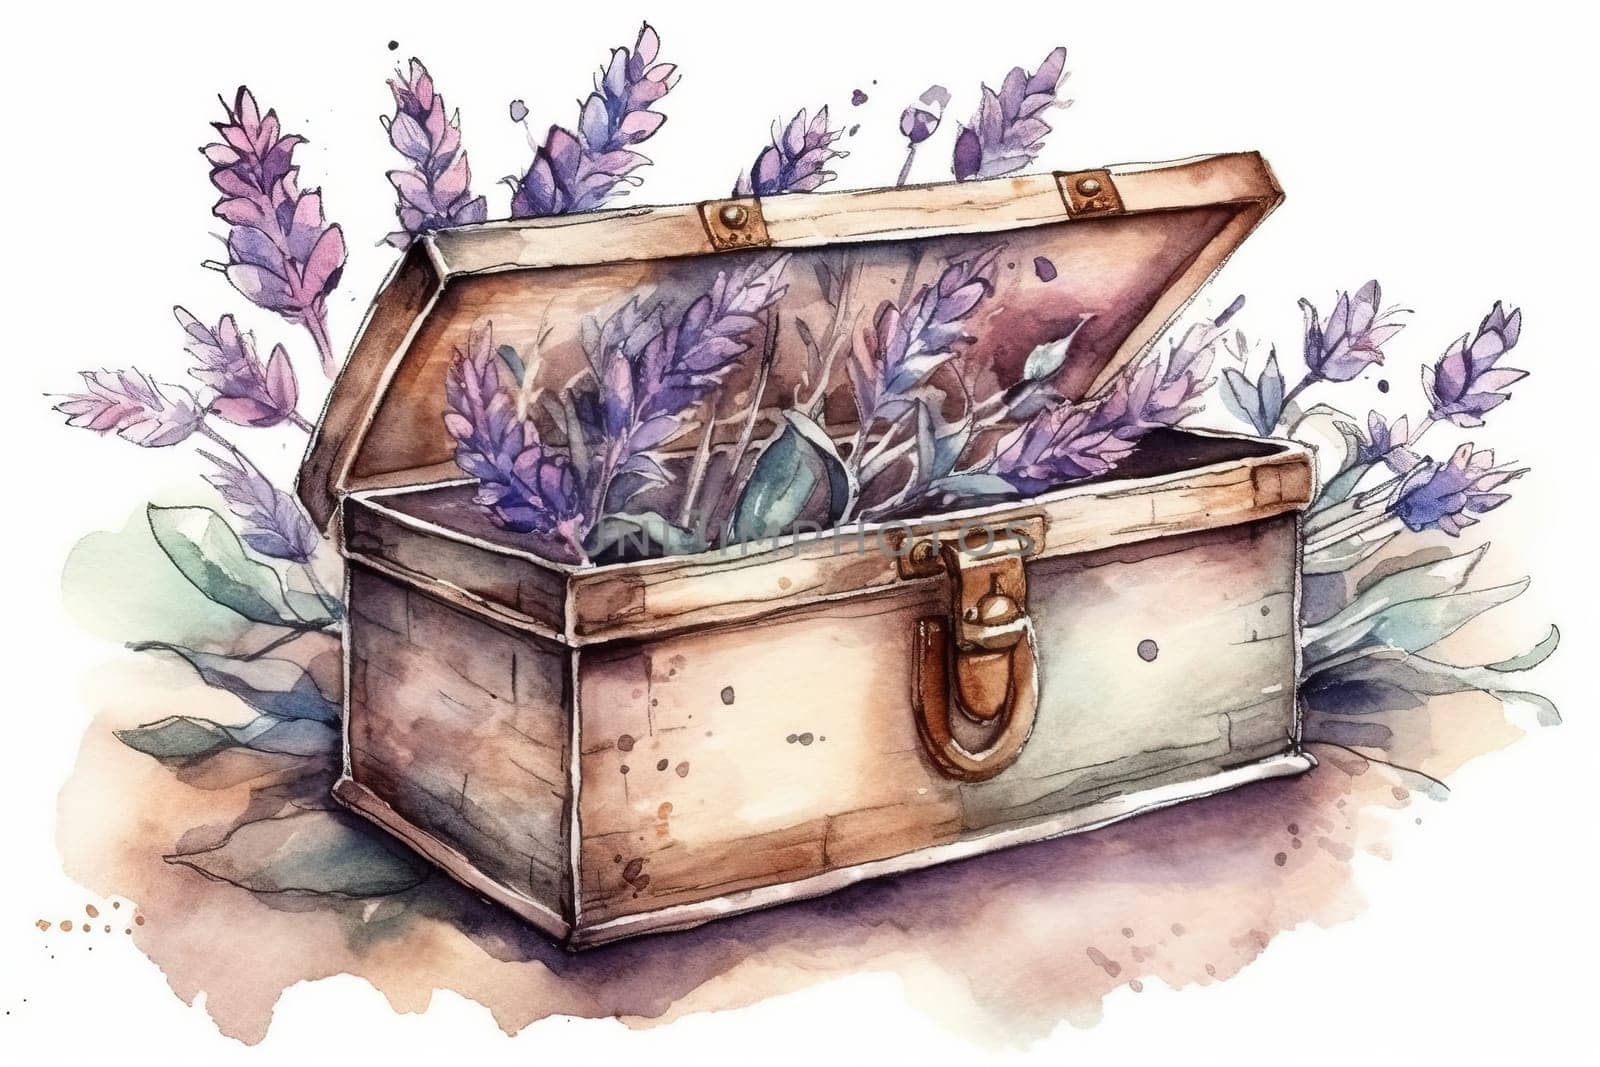 Watercolor Illustration Of Wooden Scented Box With Lavender by GekaSkr